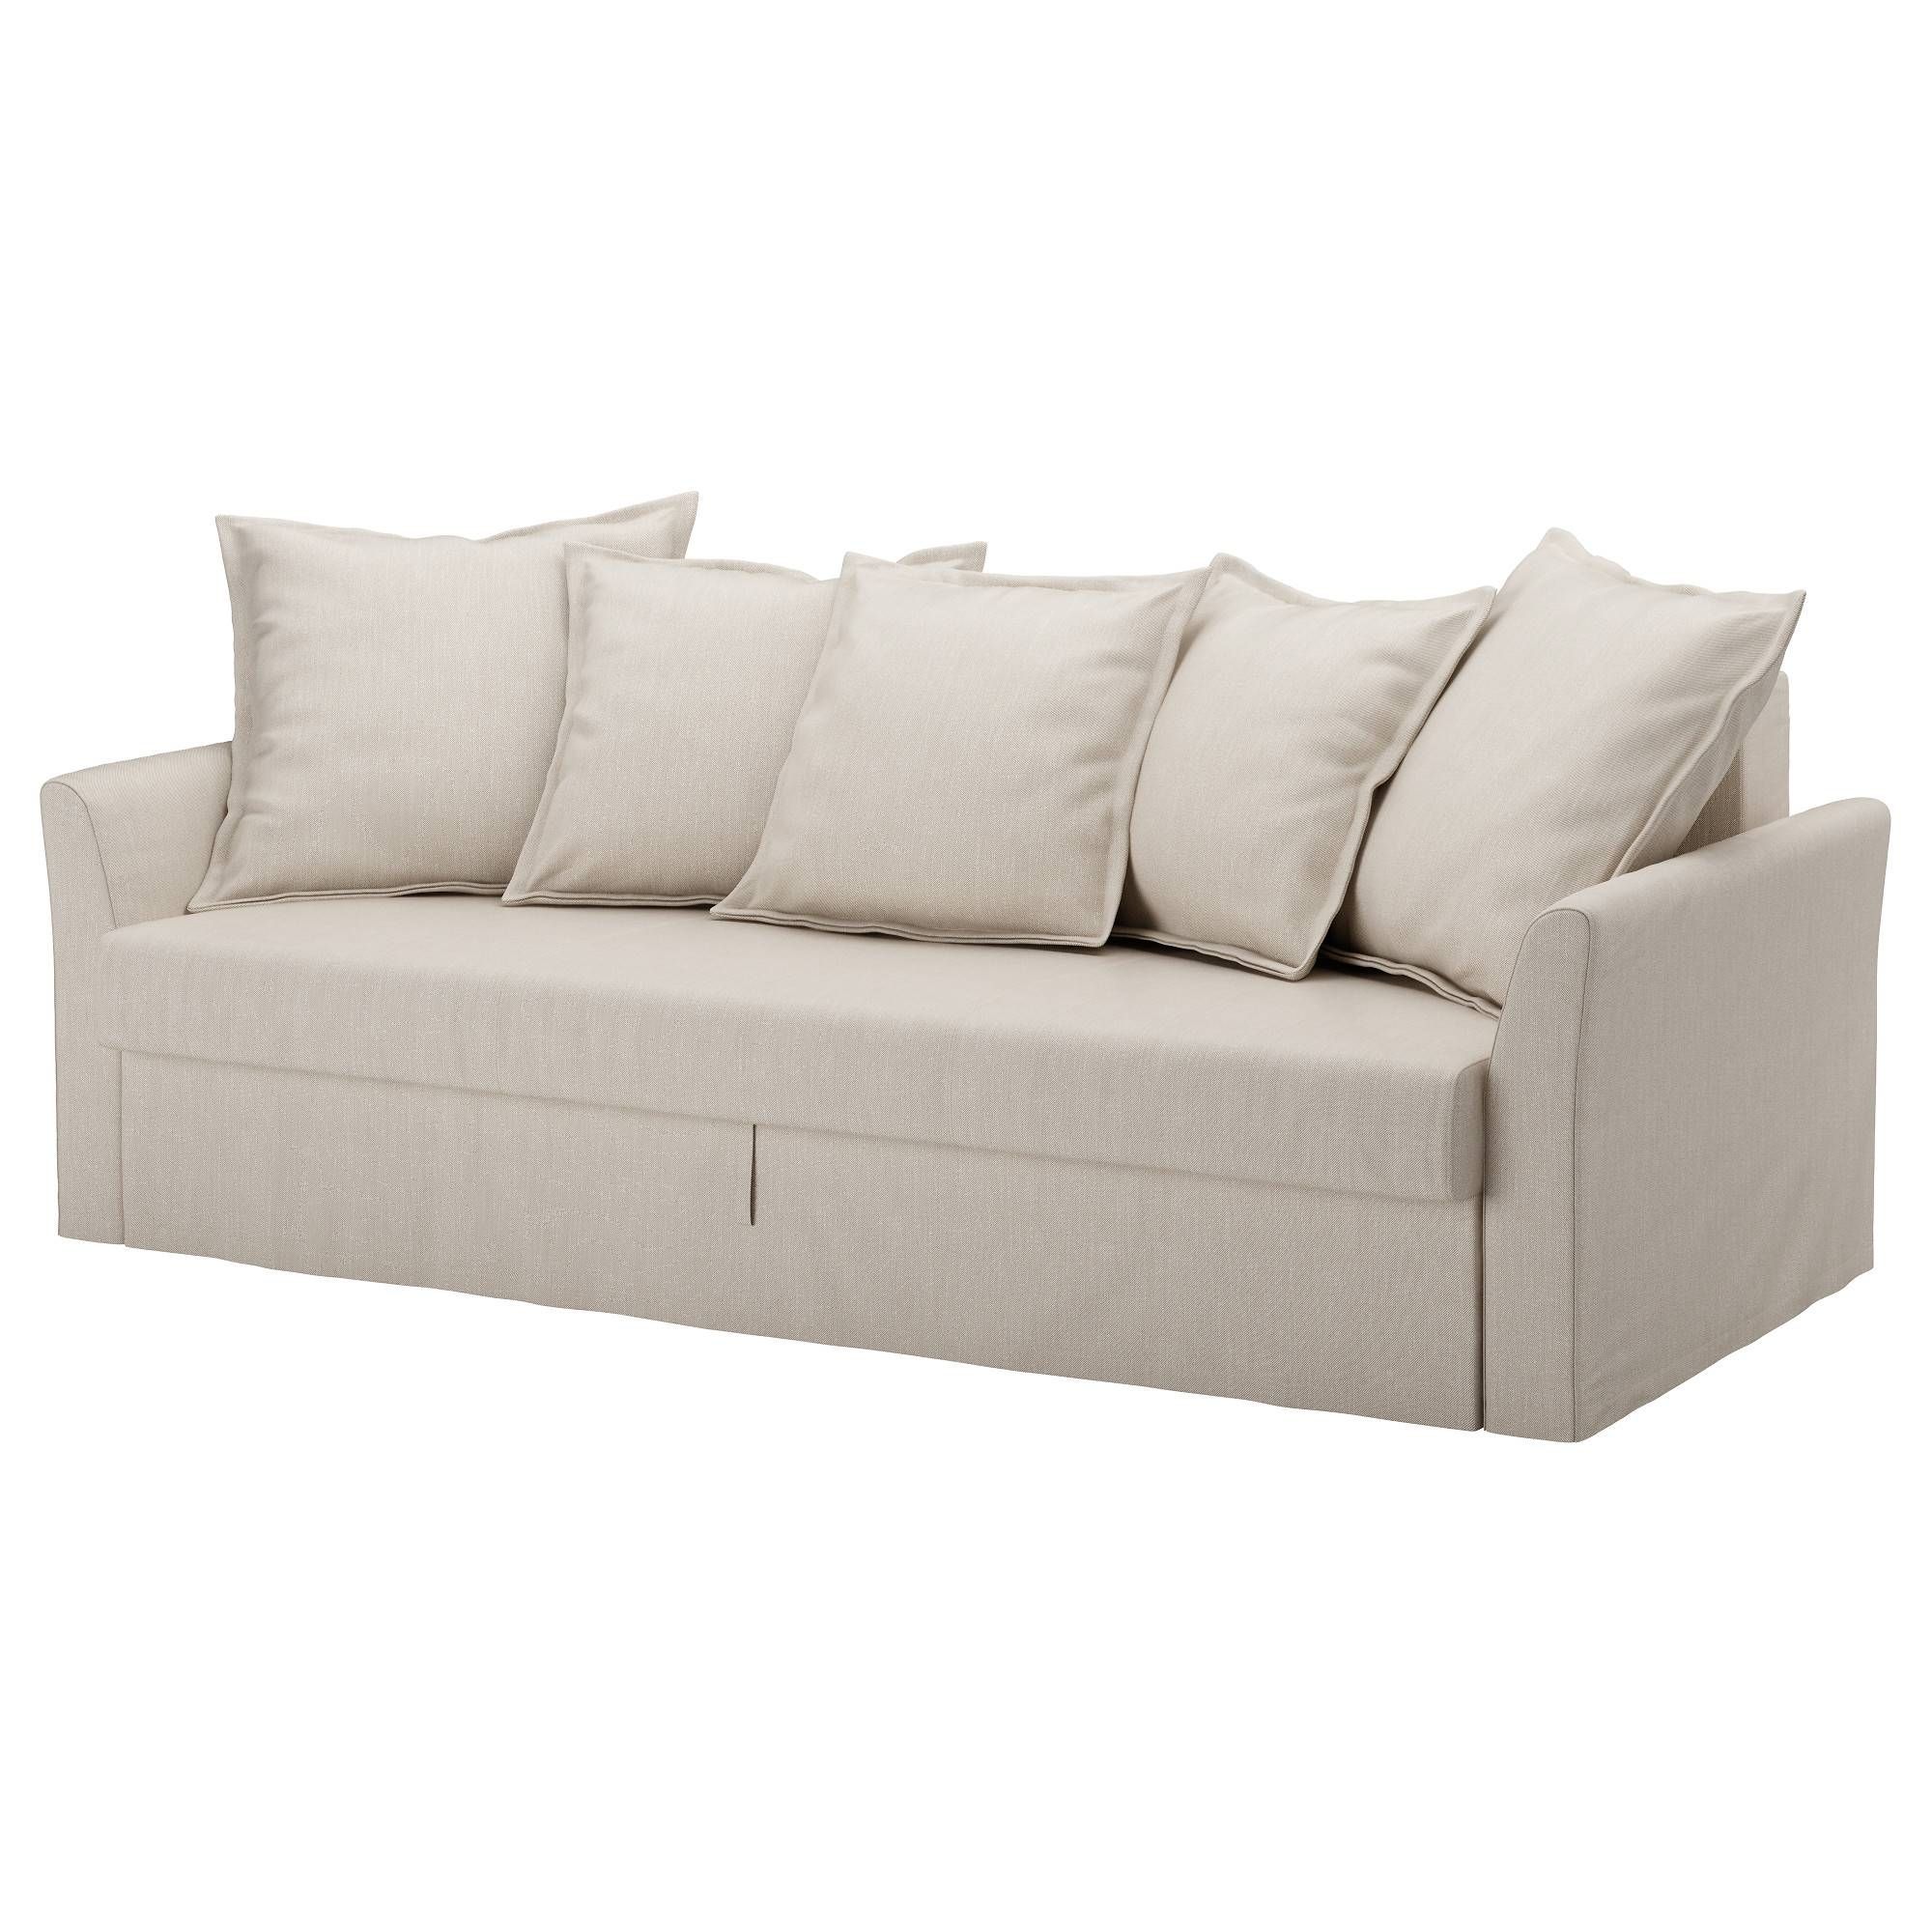 Sofa Beds & Futons – Ikea For Ikea Loveseat Sleeper Sofas (View 7 of 30)